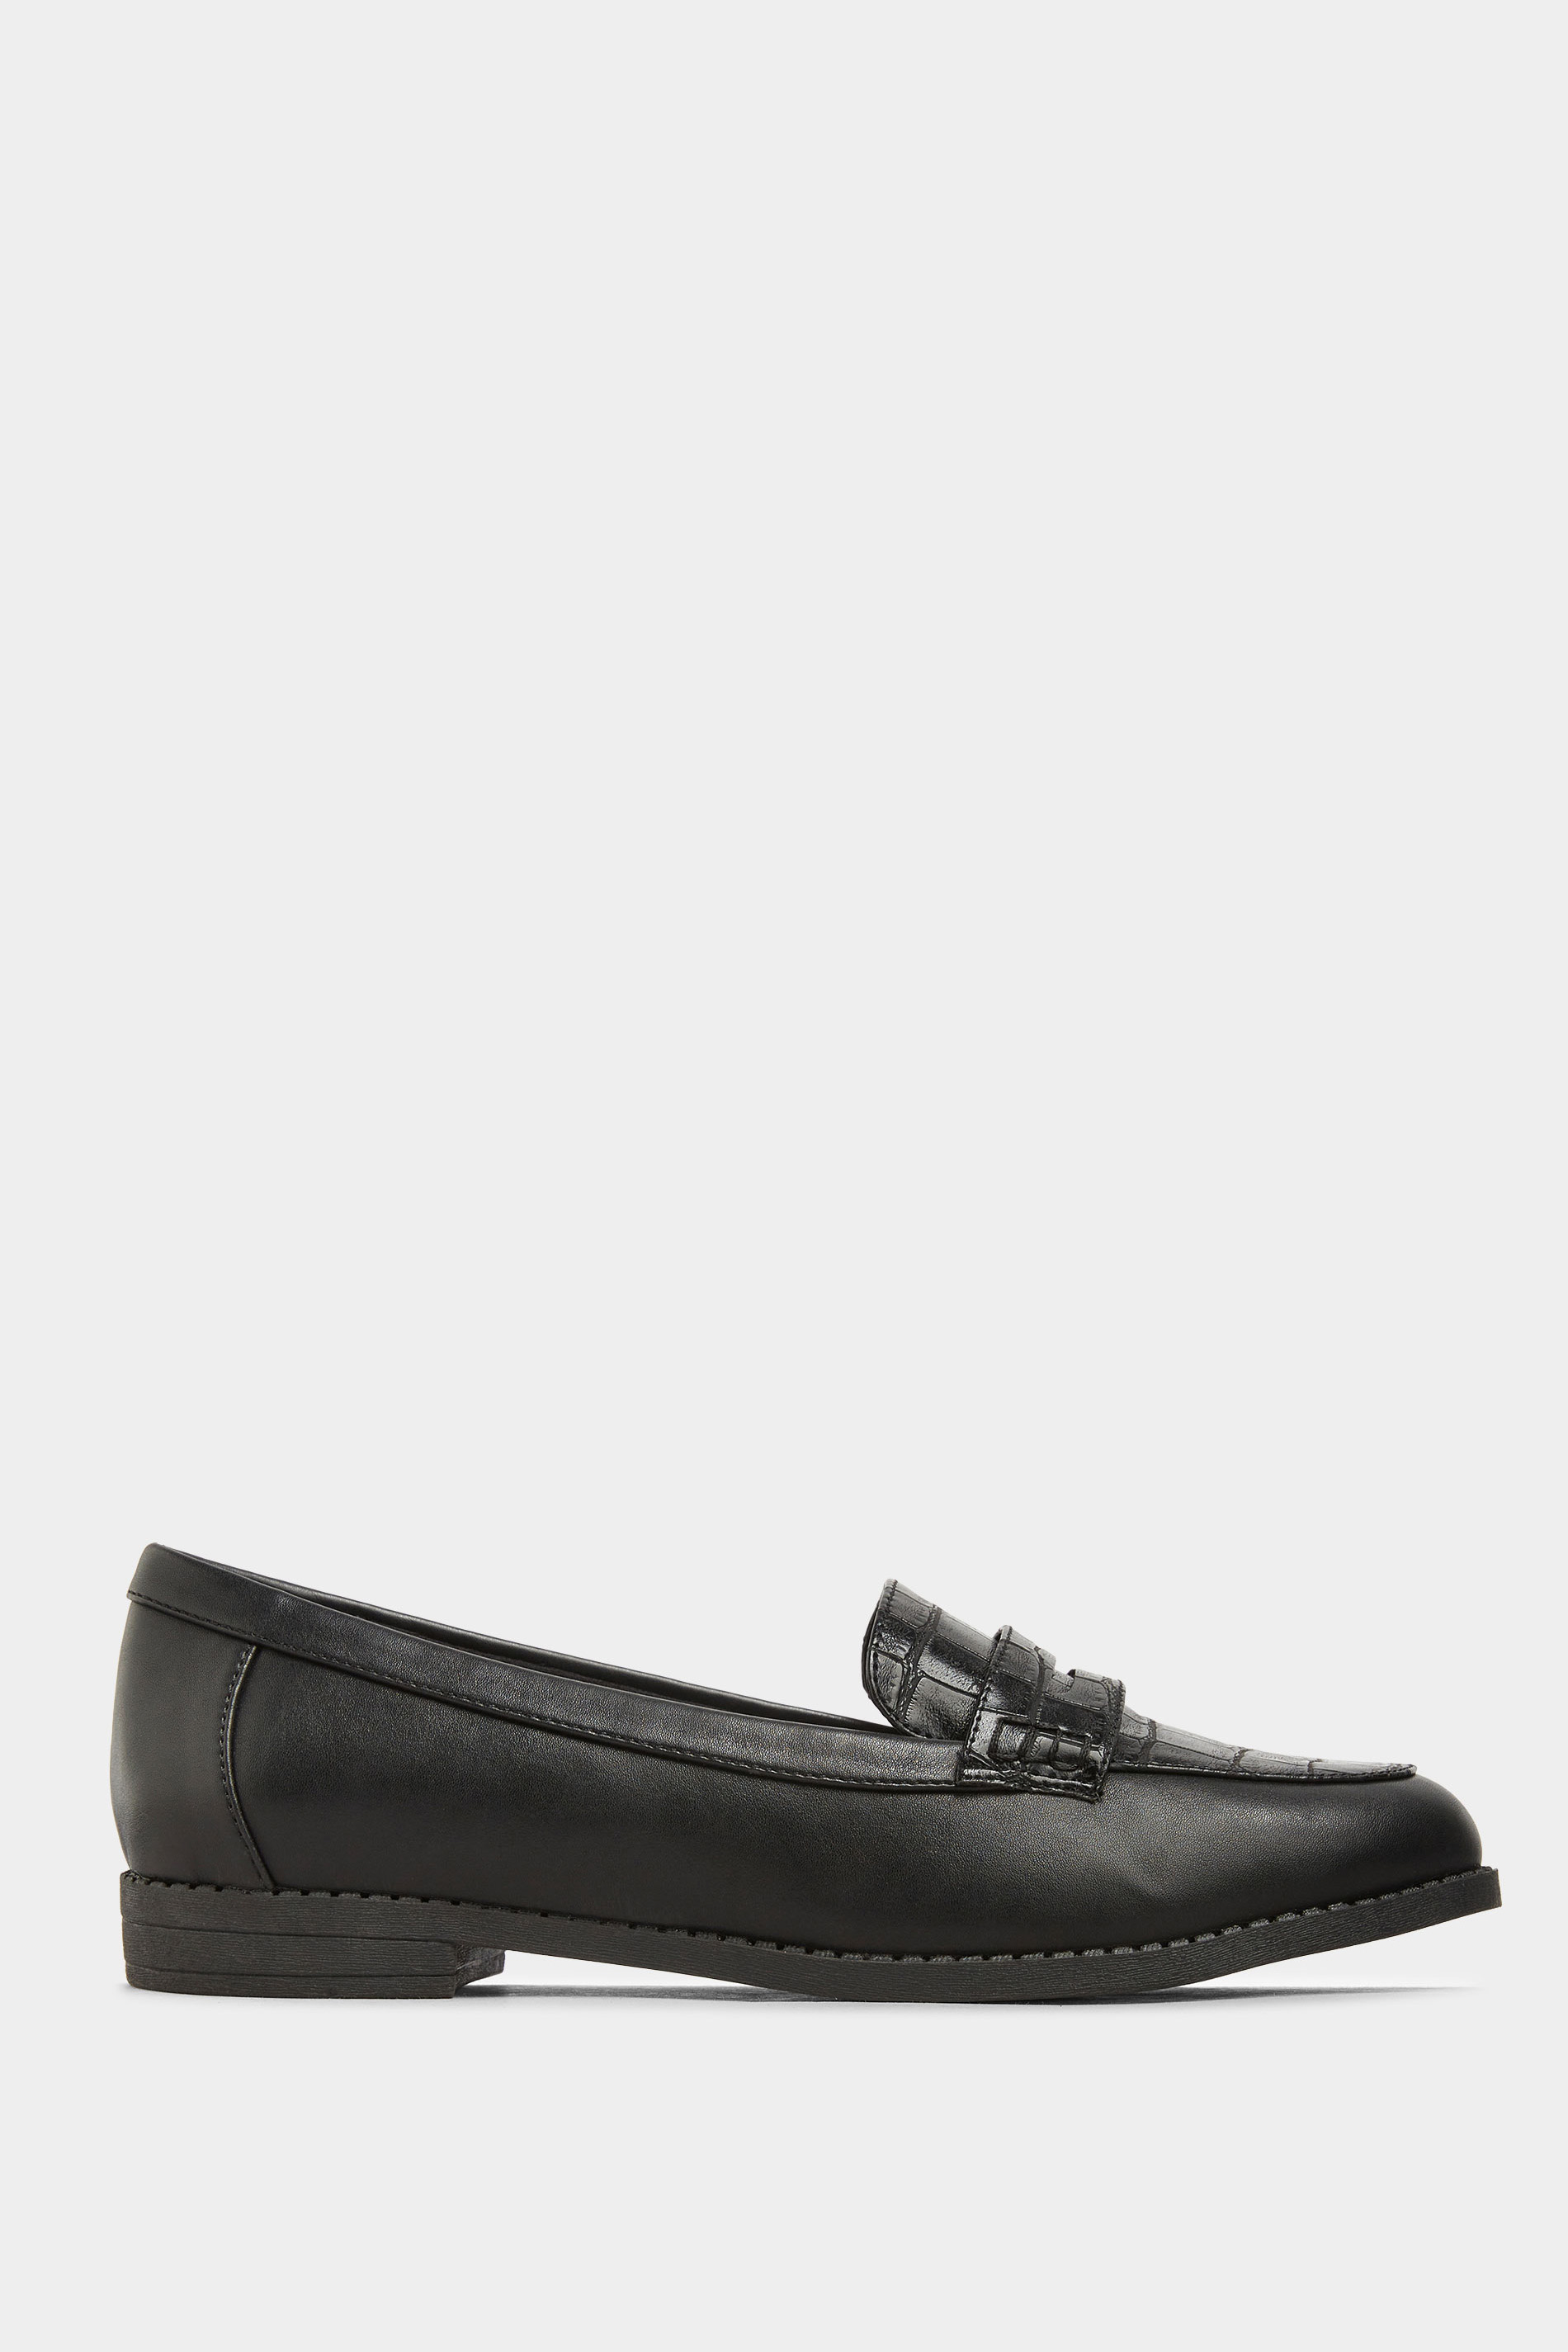 Black Croc Loafers In Extra Wide Fit | Yours Clothing 3